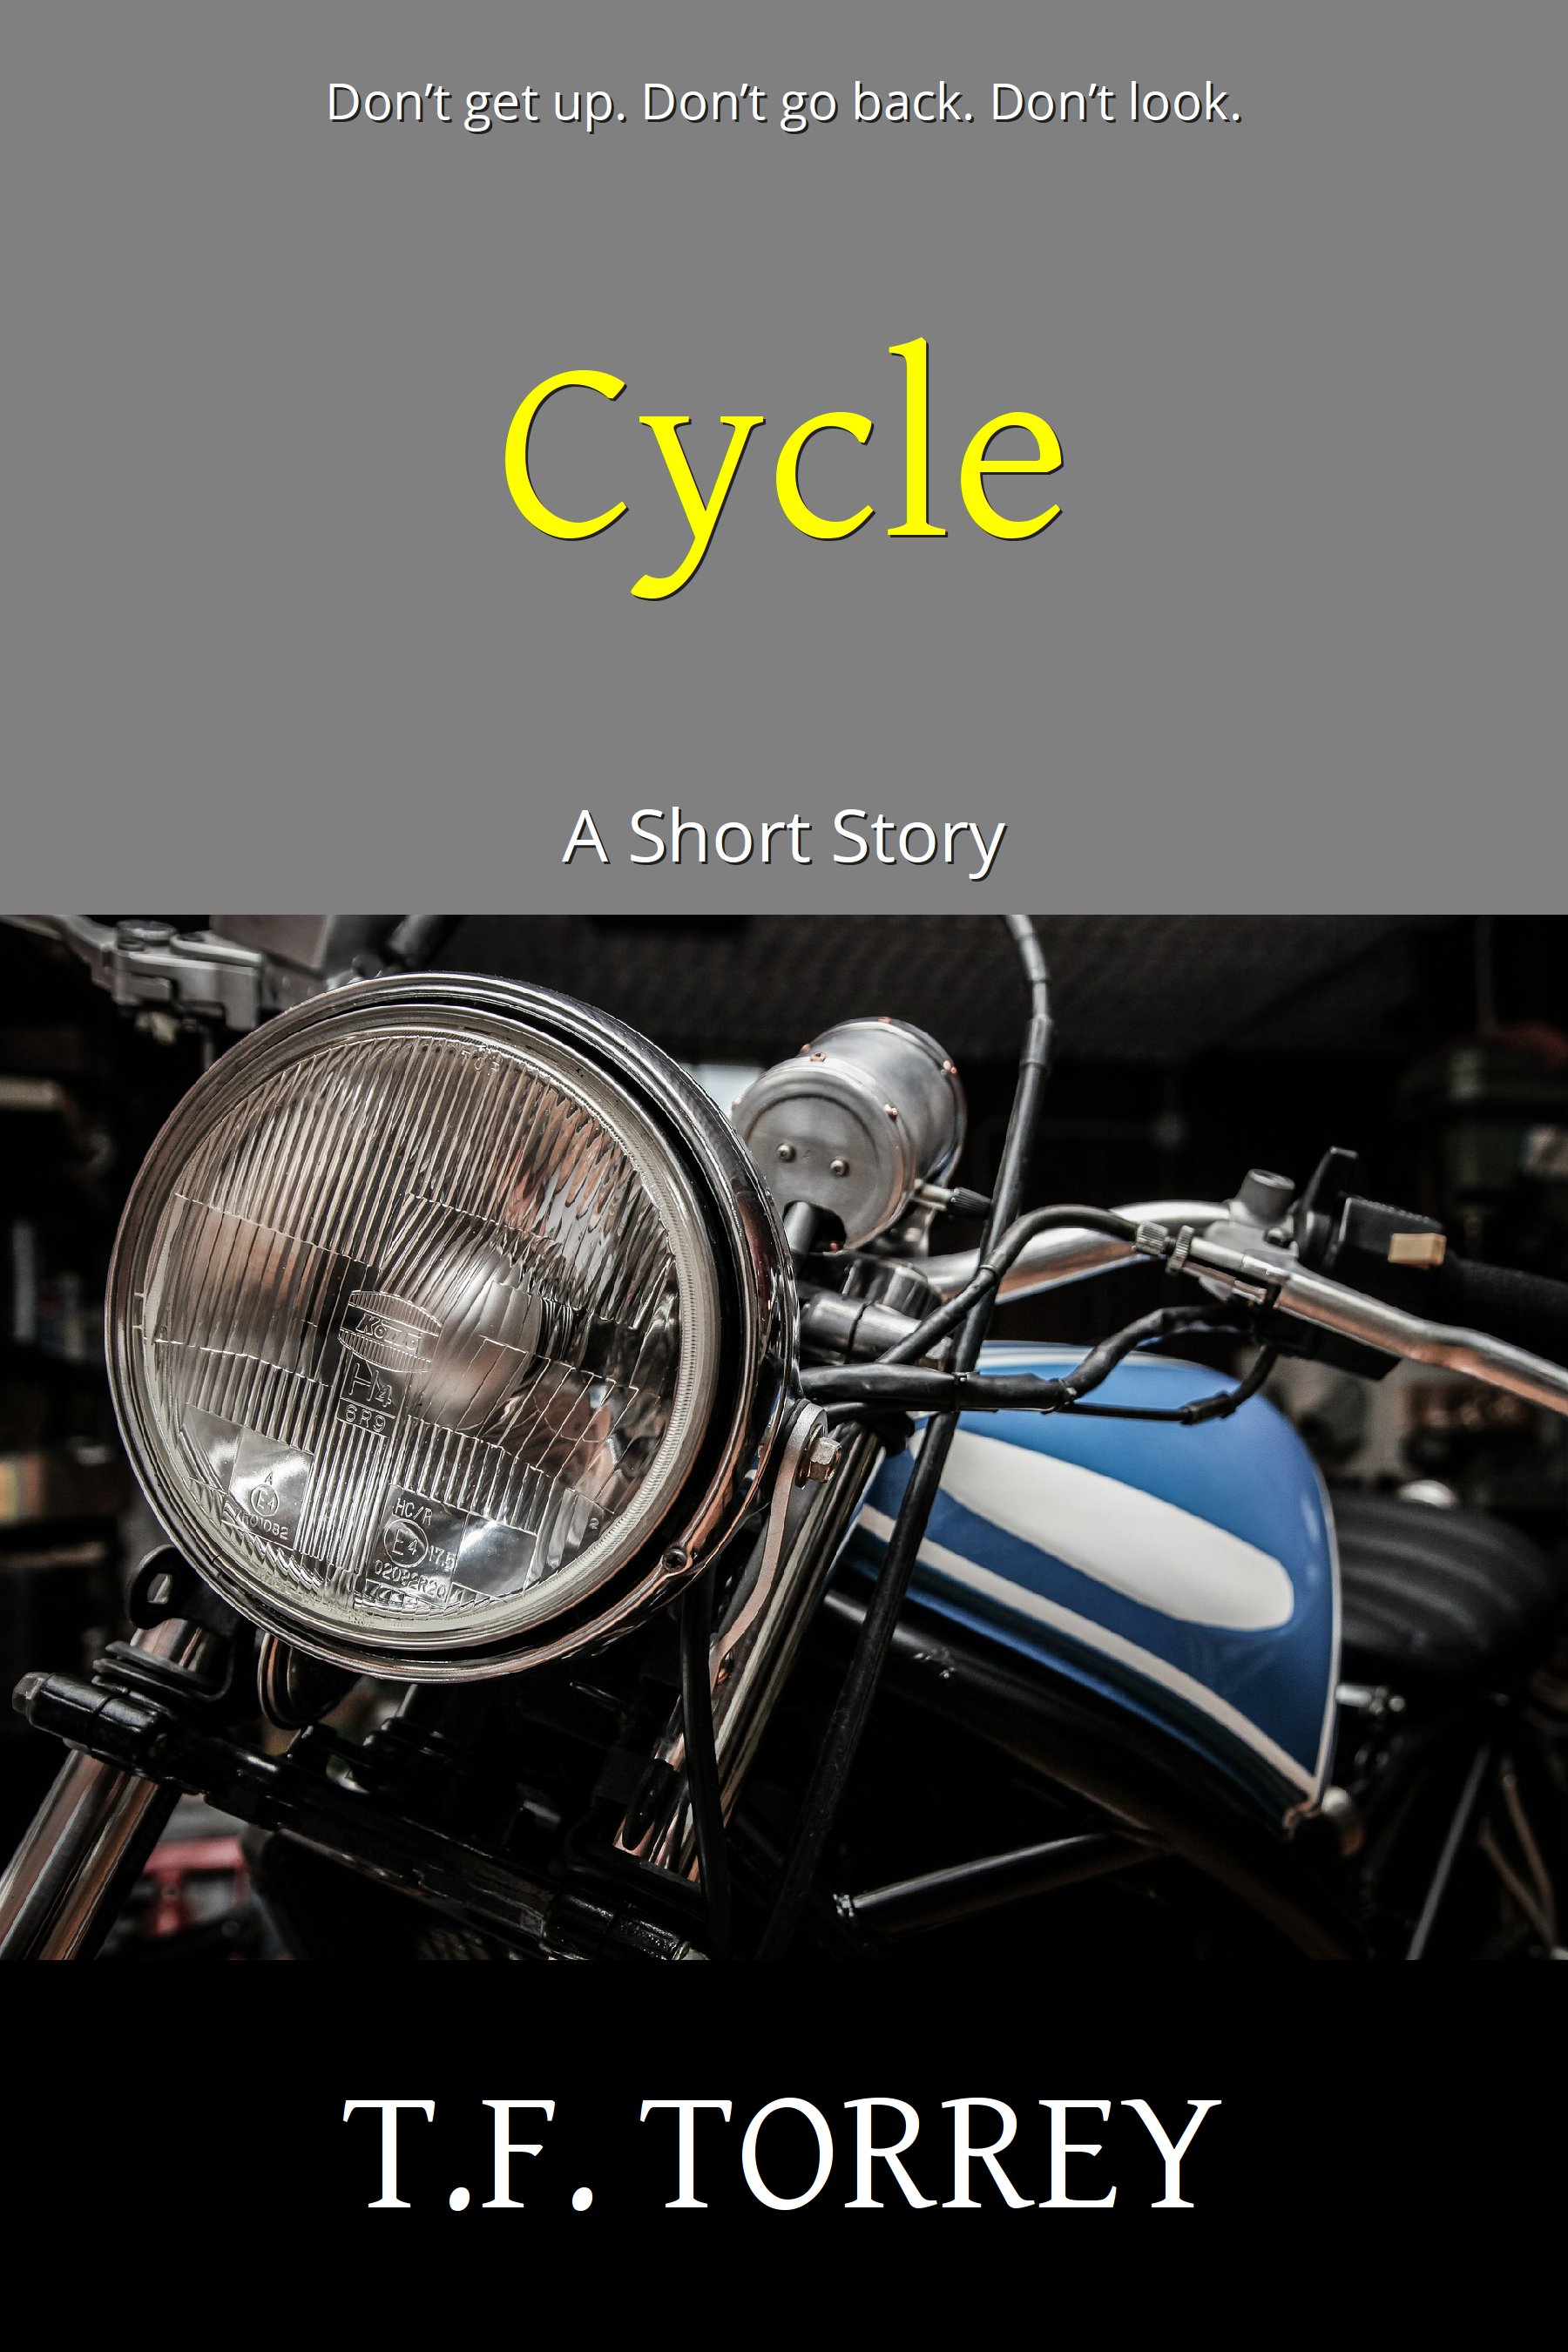 Cover of Cycle: A Short Story by T.F. Torrey